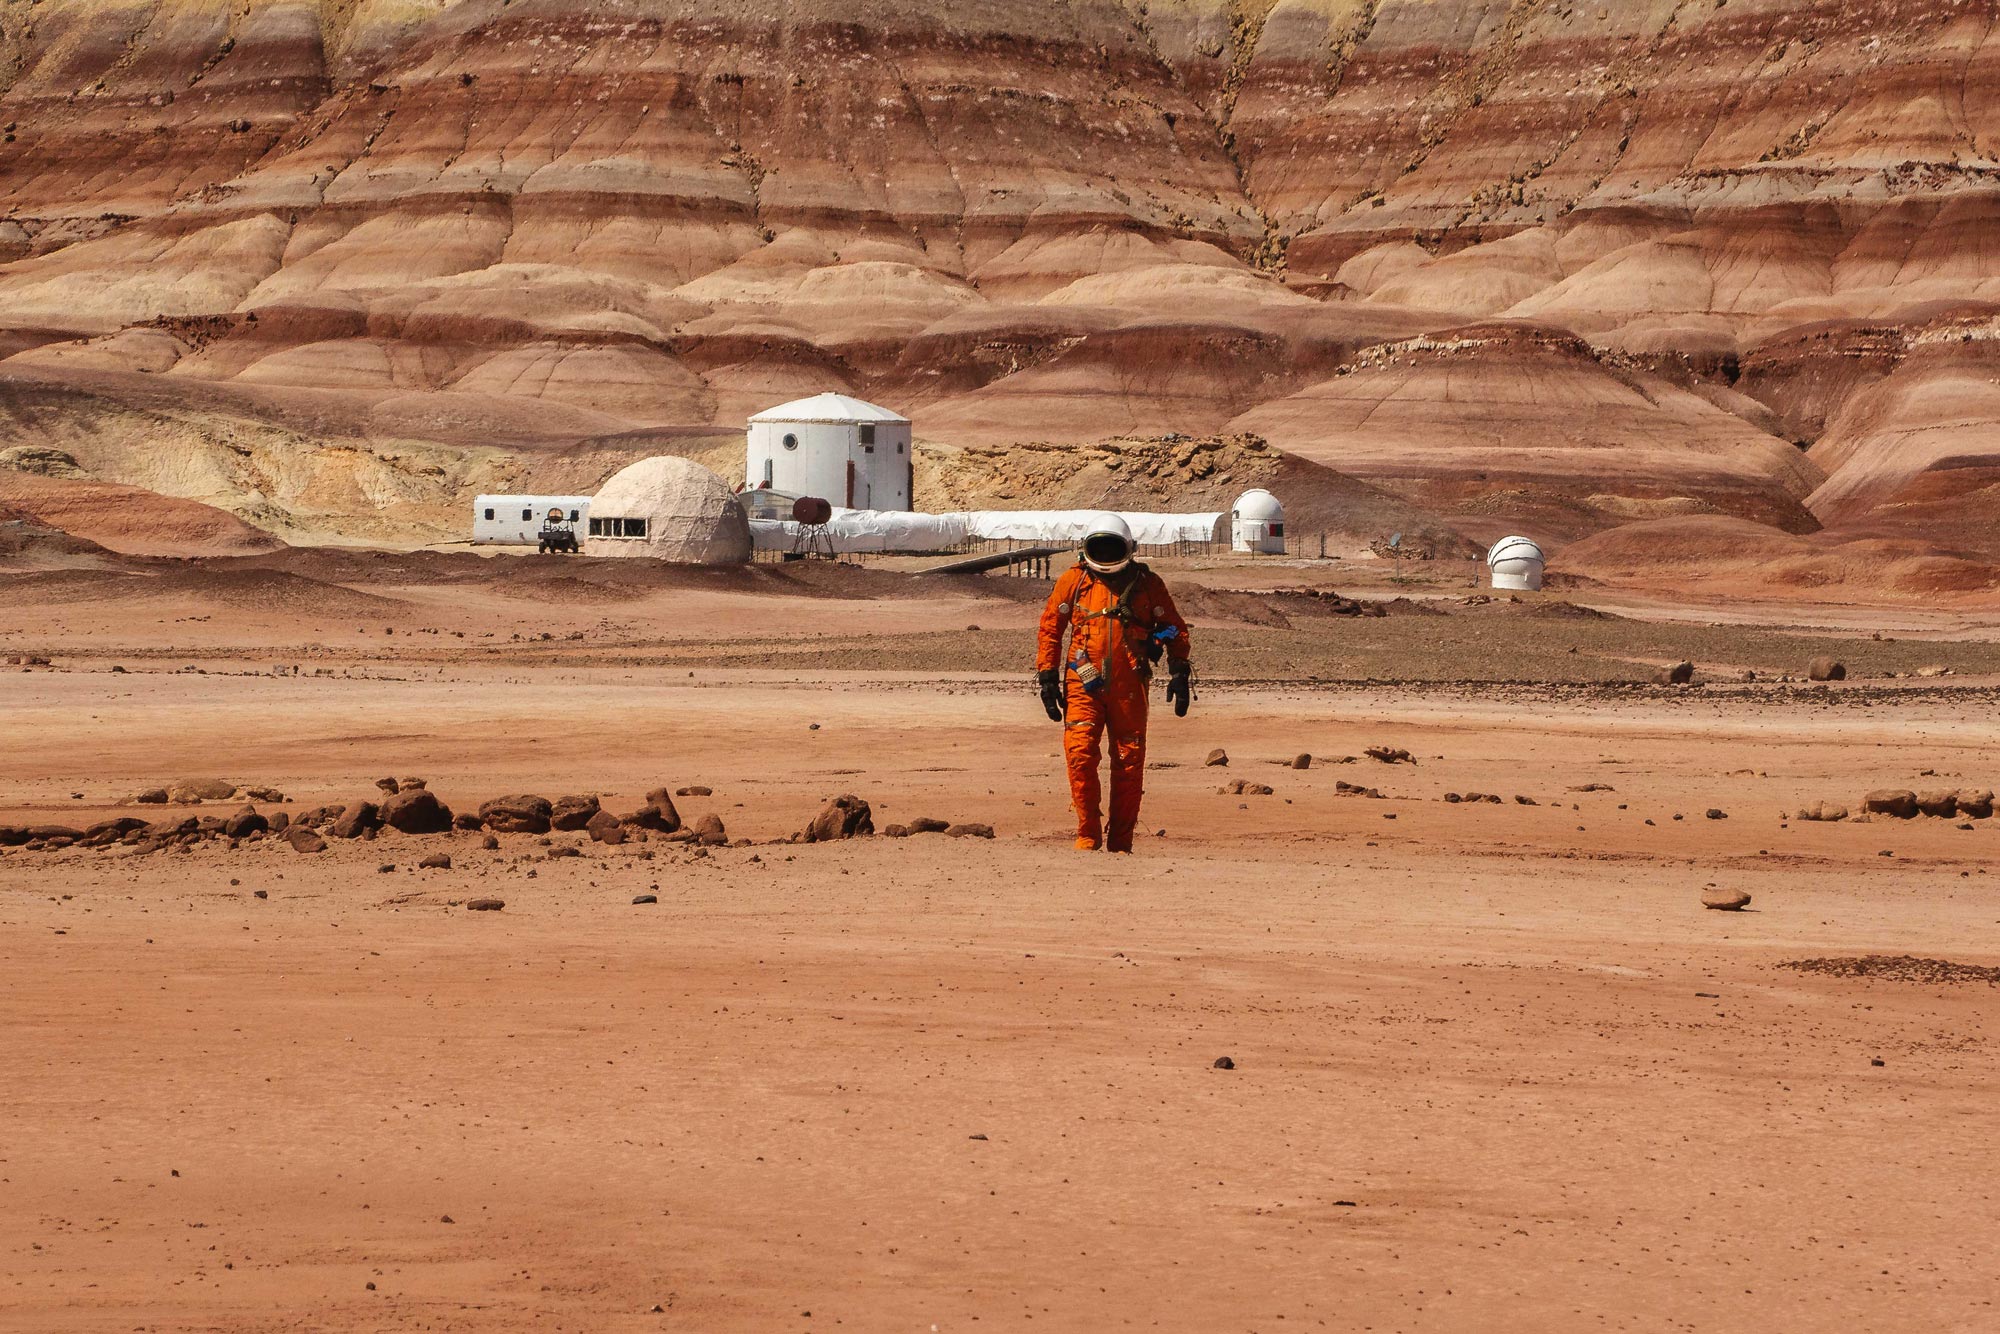 An astronaut walks through the 'Mars-like' landscape of the desert in Utah at a Mars Rover training station.